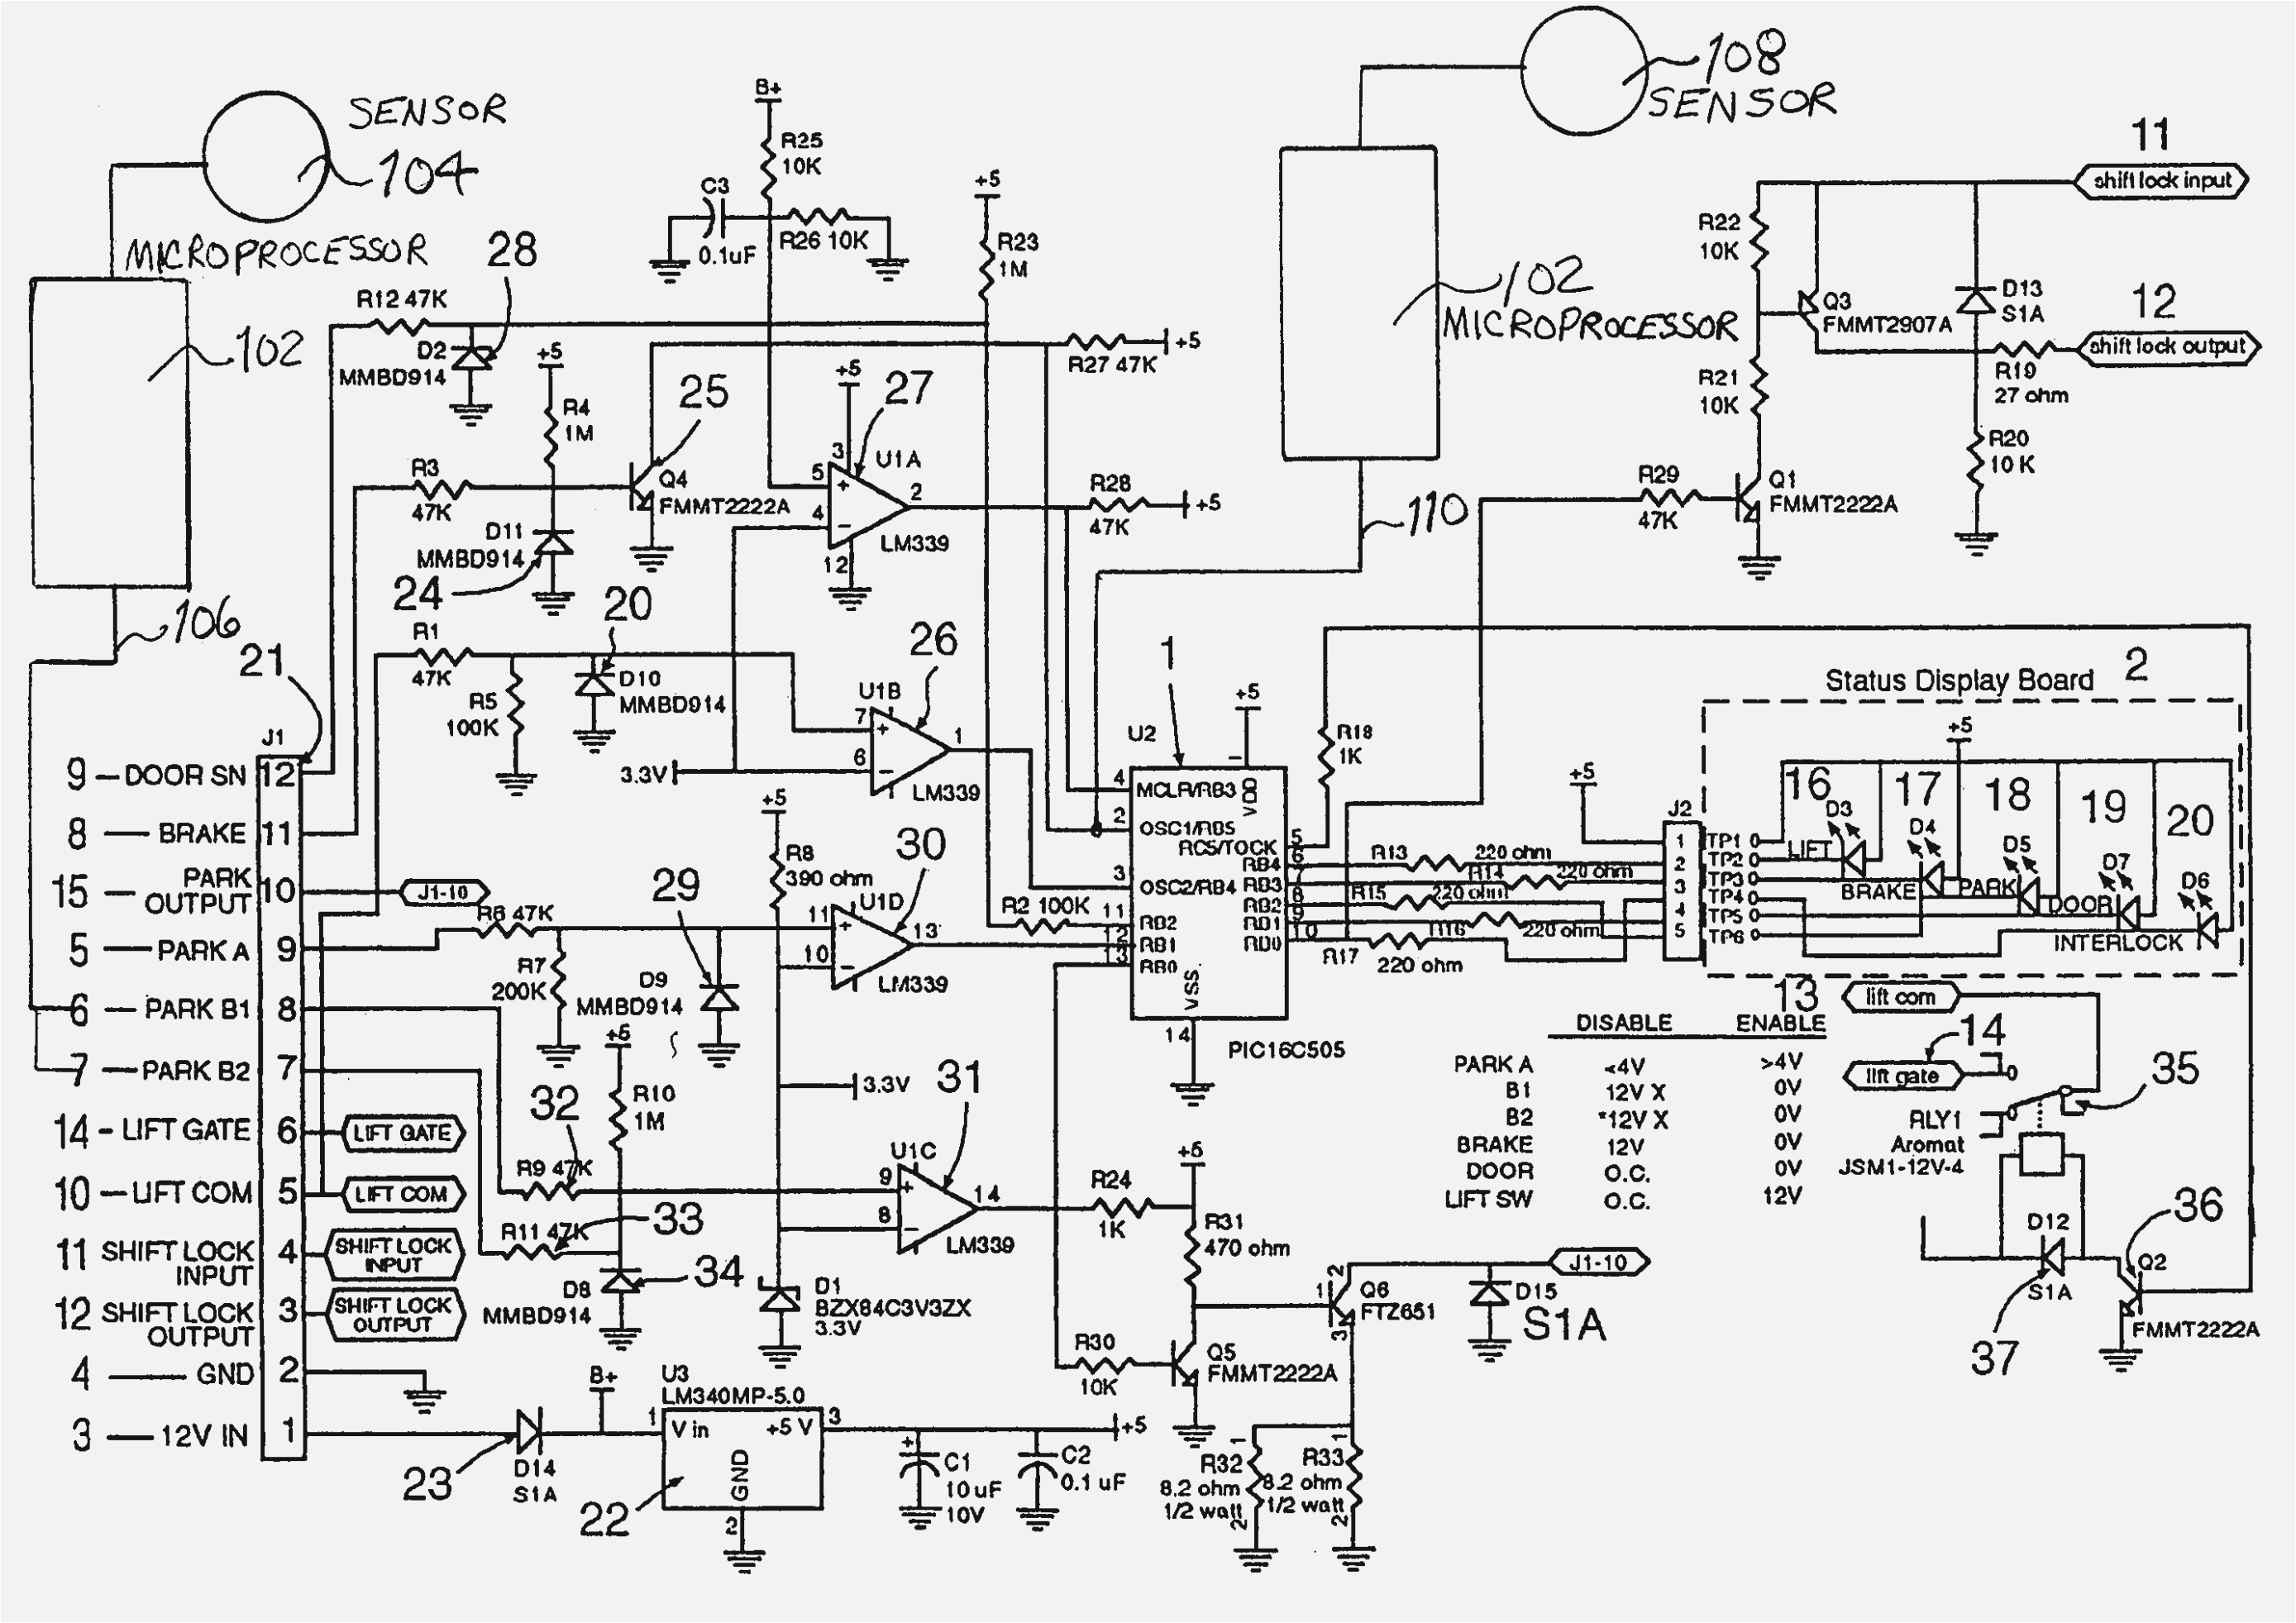 wiring diagram ricon pendant electrical wiring diagram interlock crane electrical diagram